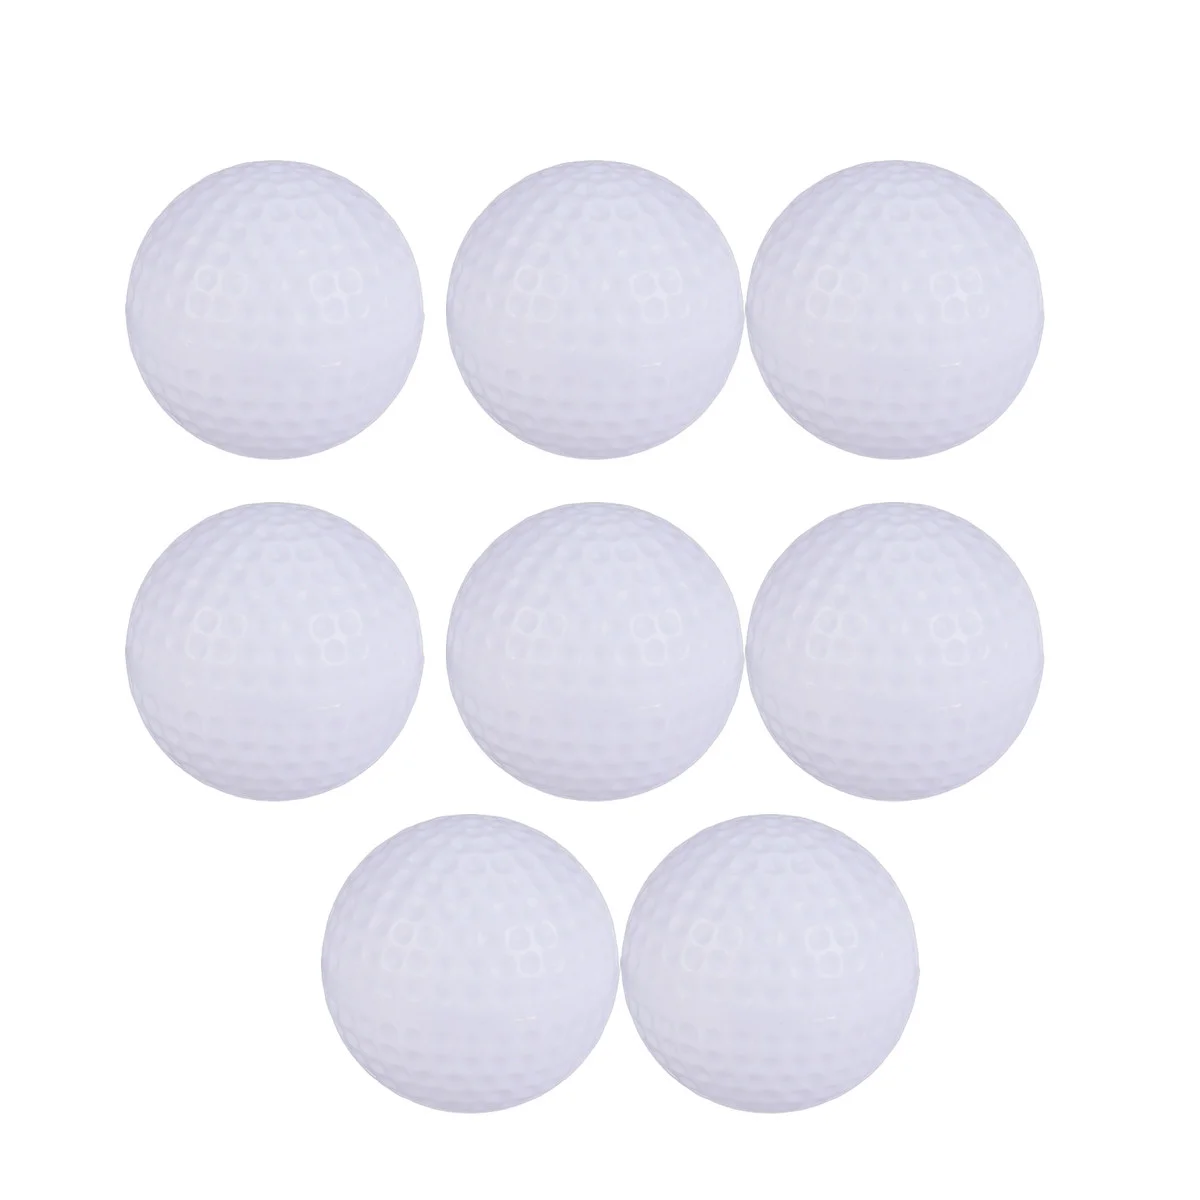 

12pcs  Practice Ball, Hollow Training Balls Training Golf Balls for Toddler Kids Indoor Training Outdoor Lawn